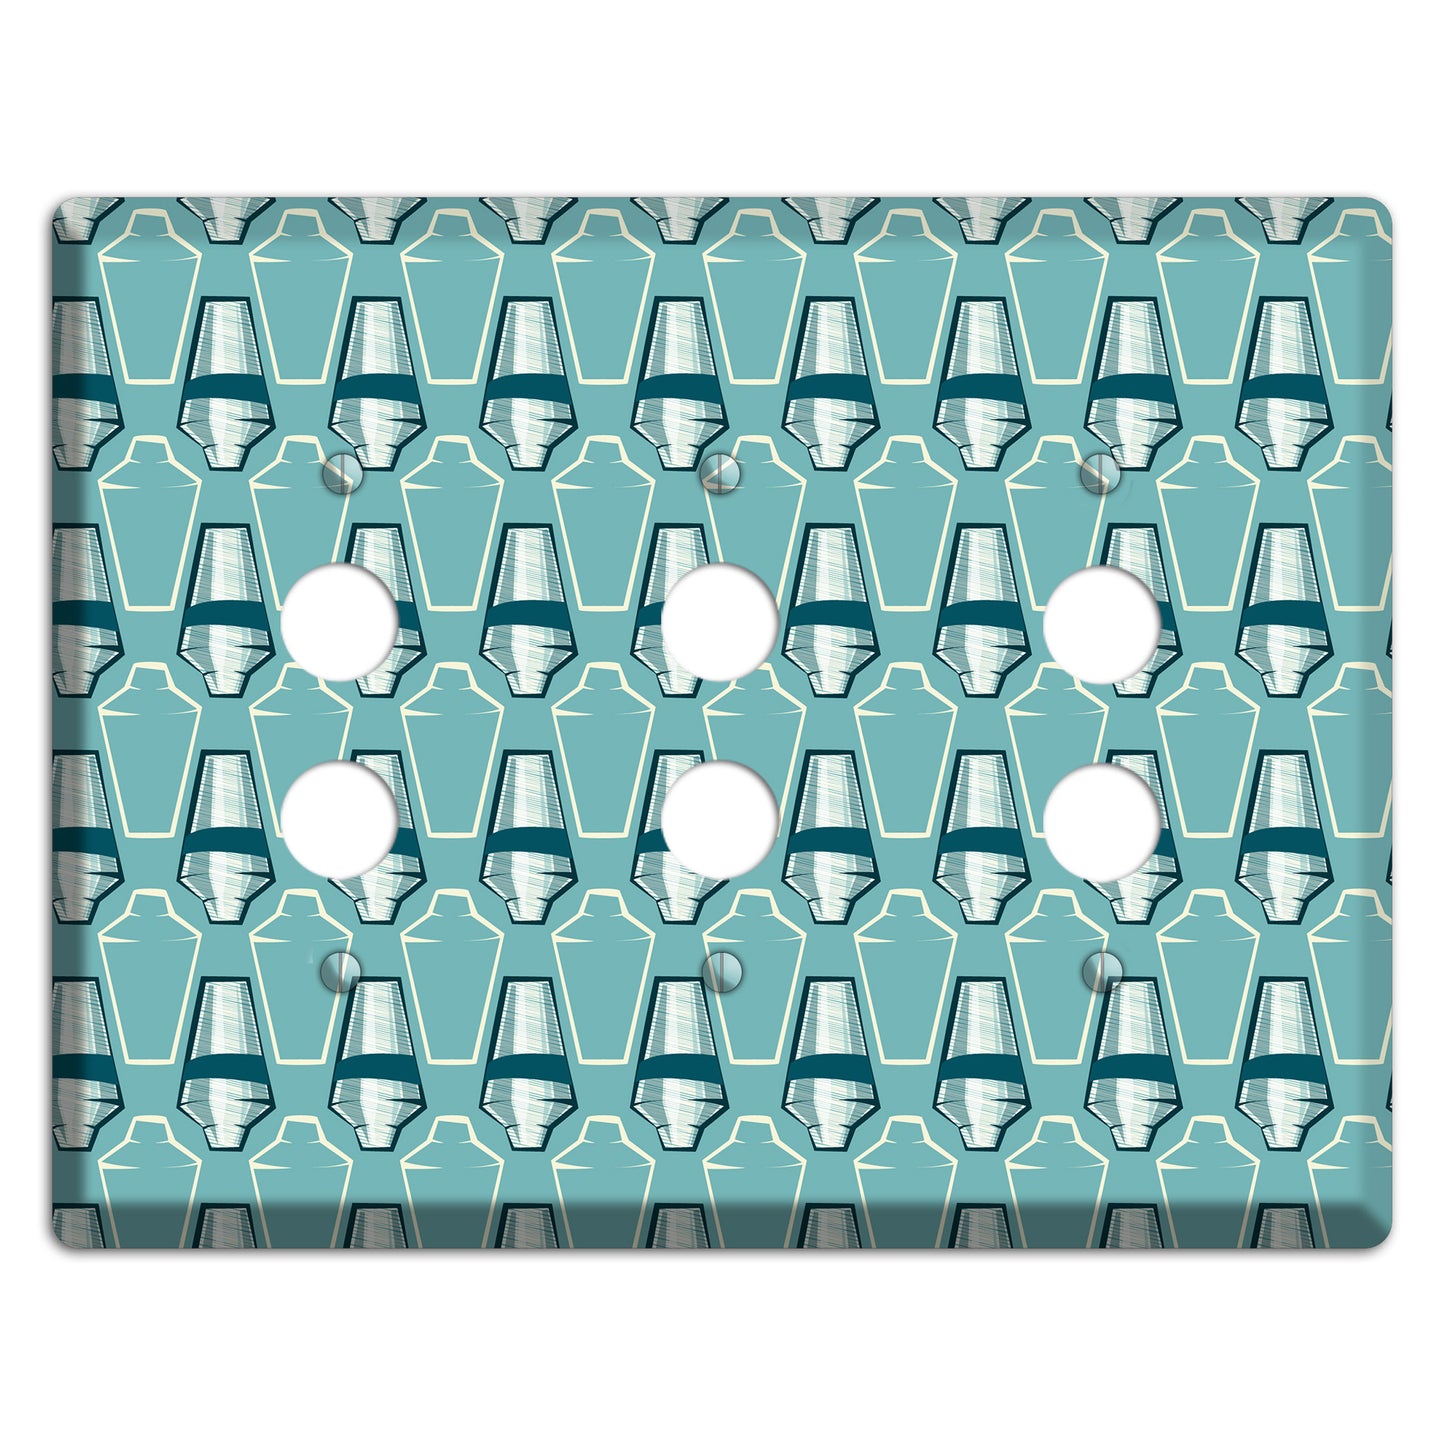 Cocktail Shakers 3 Pushbutton Wallplate